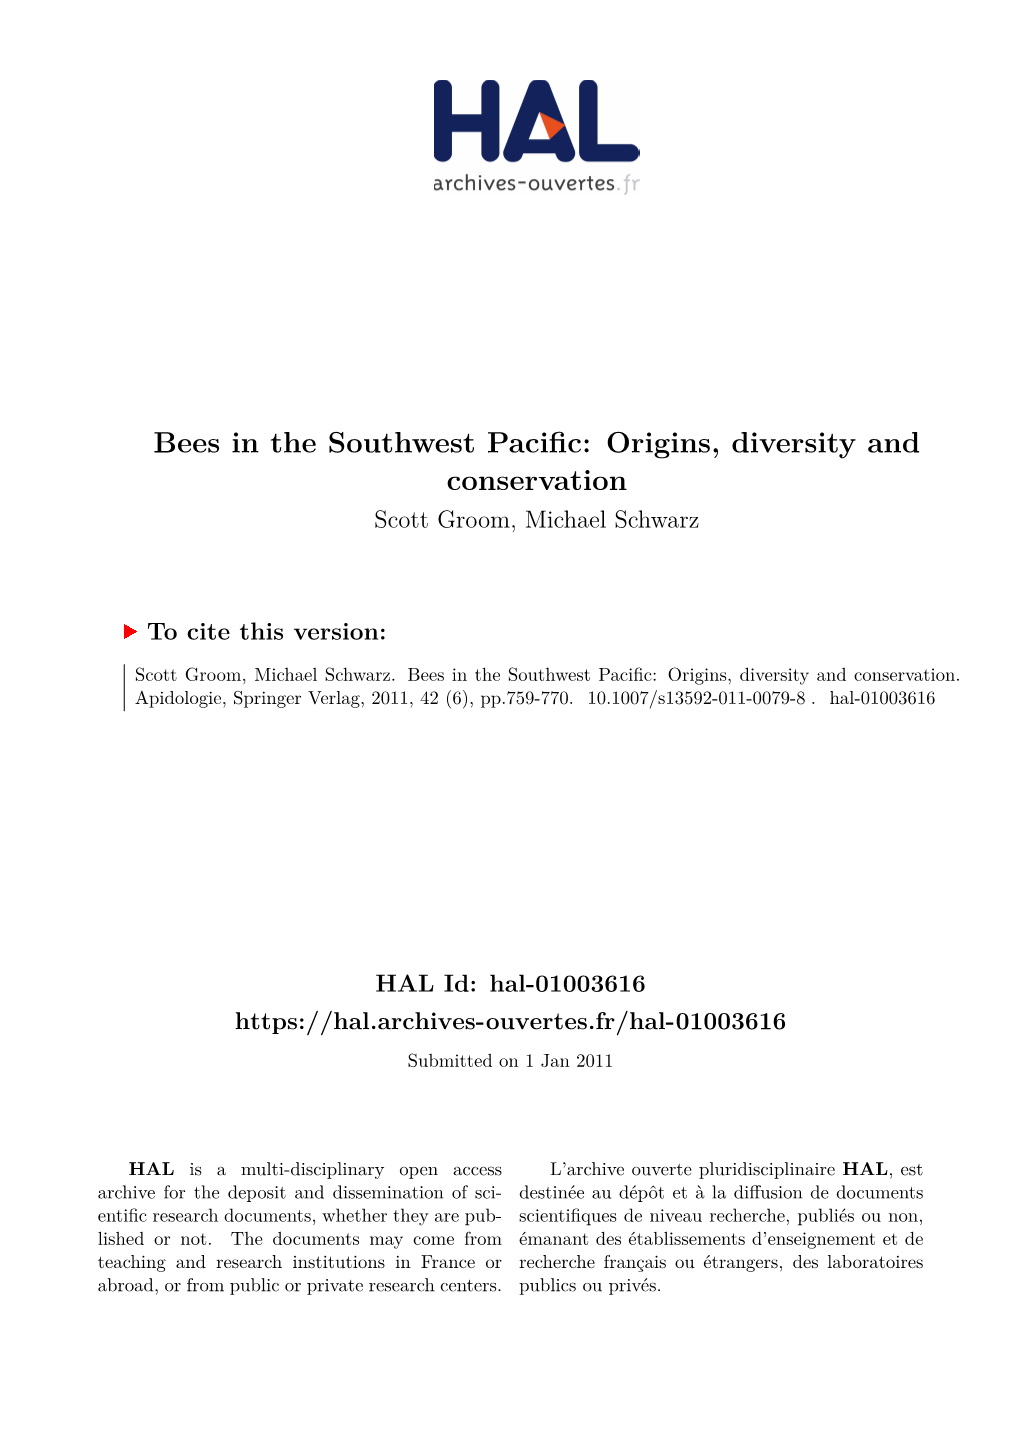 Bees in the Southwest Pacific: Origins, Diversity and Conservation Scott Groom, Michael Schwarz